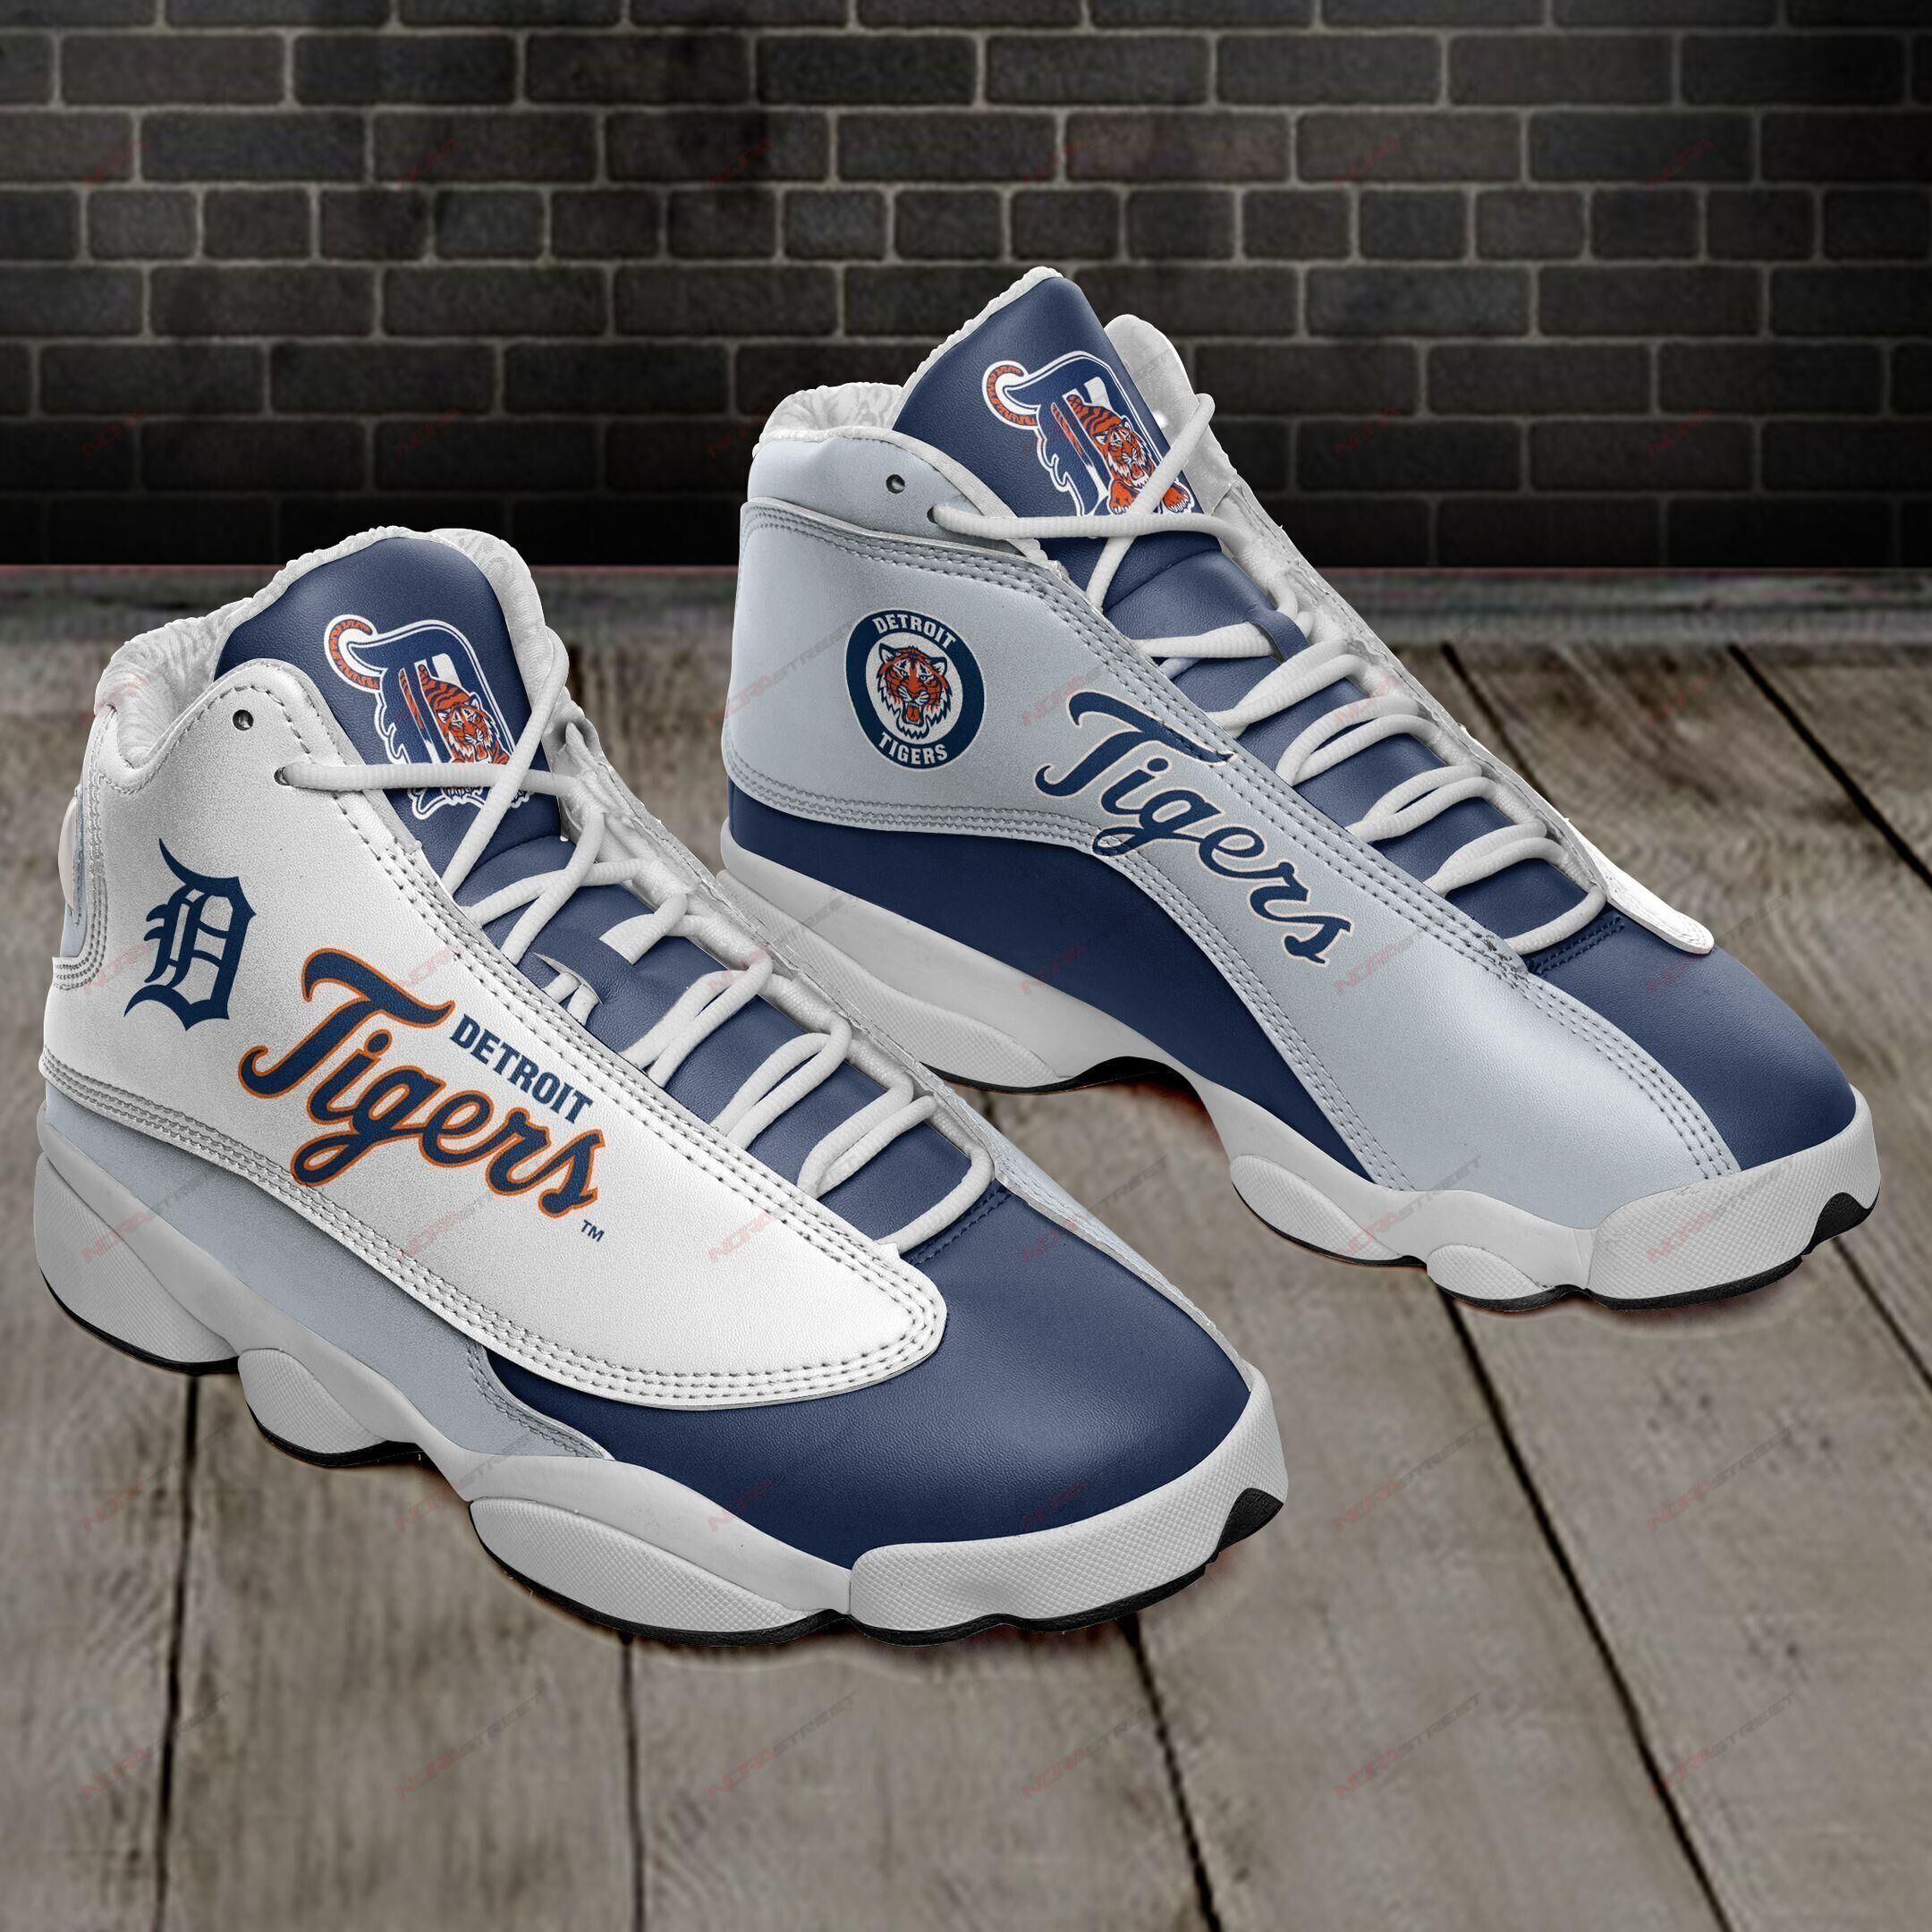 Women's Detroit Tigers Limited Edition JD13 Sneakers 001